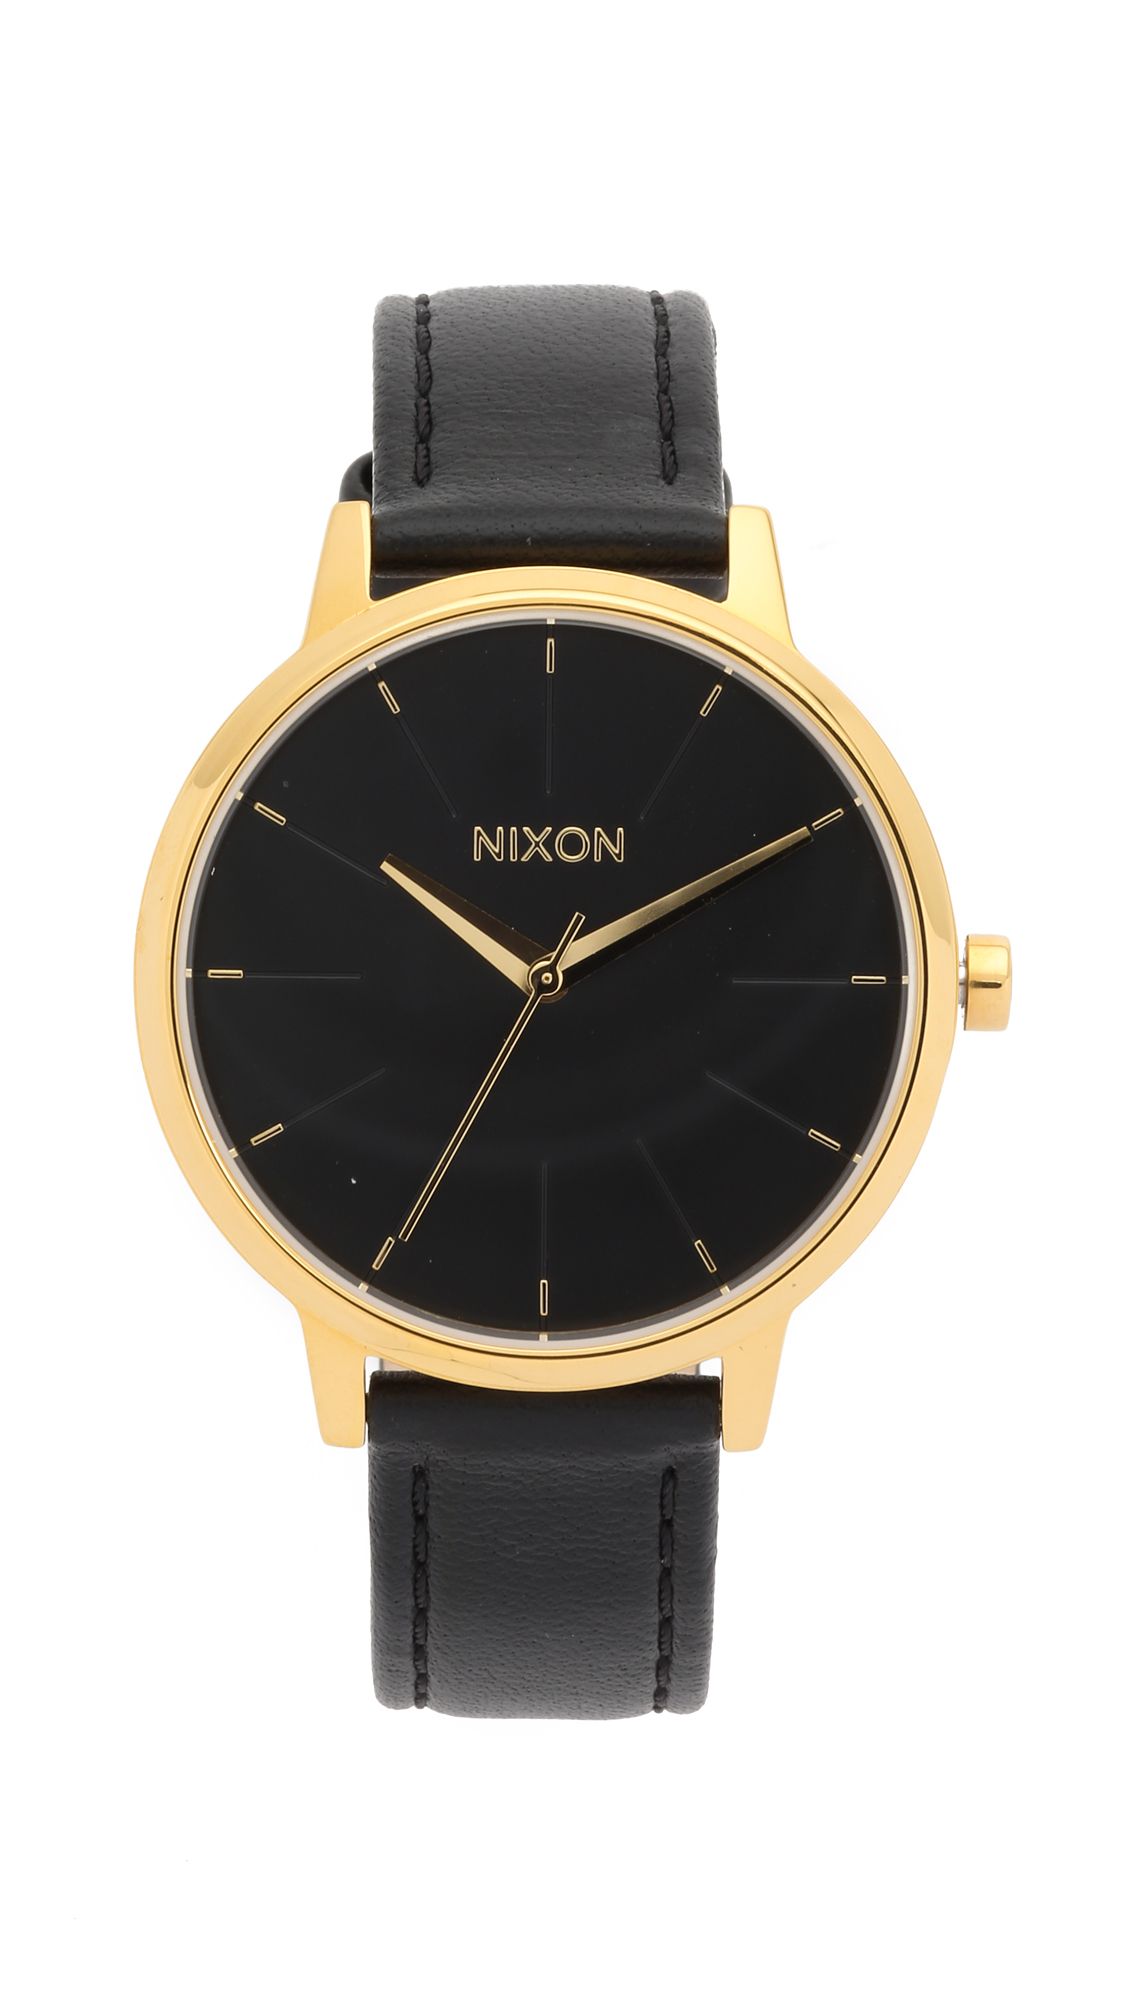 Kensington Watch with Leather Strap | Shopbop